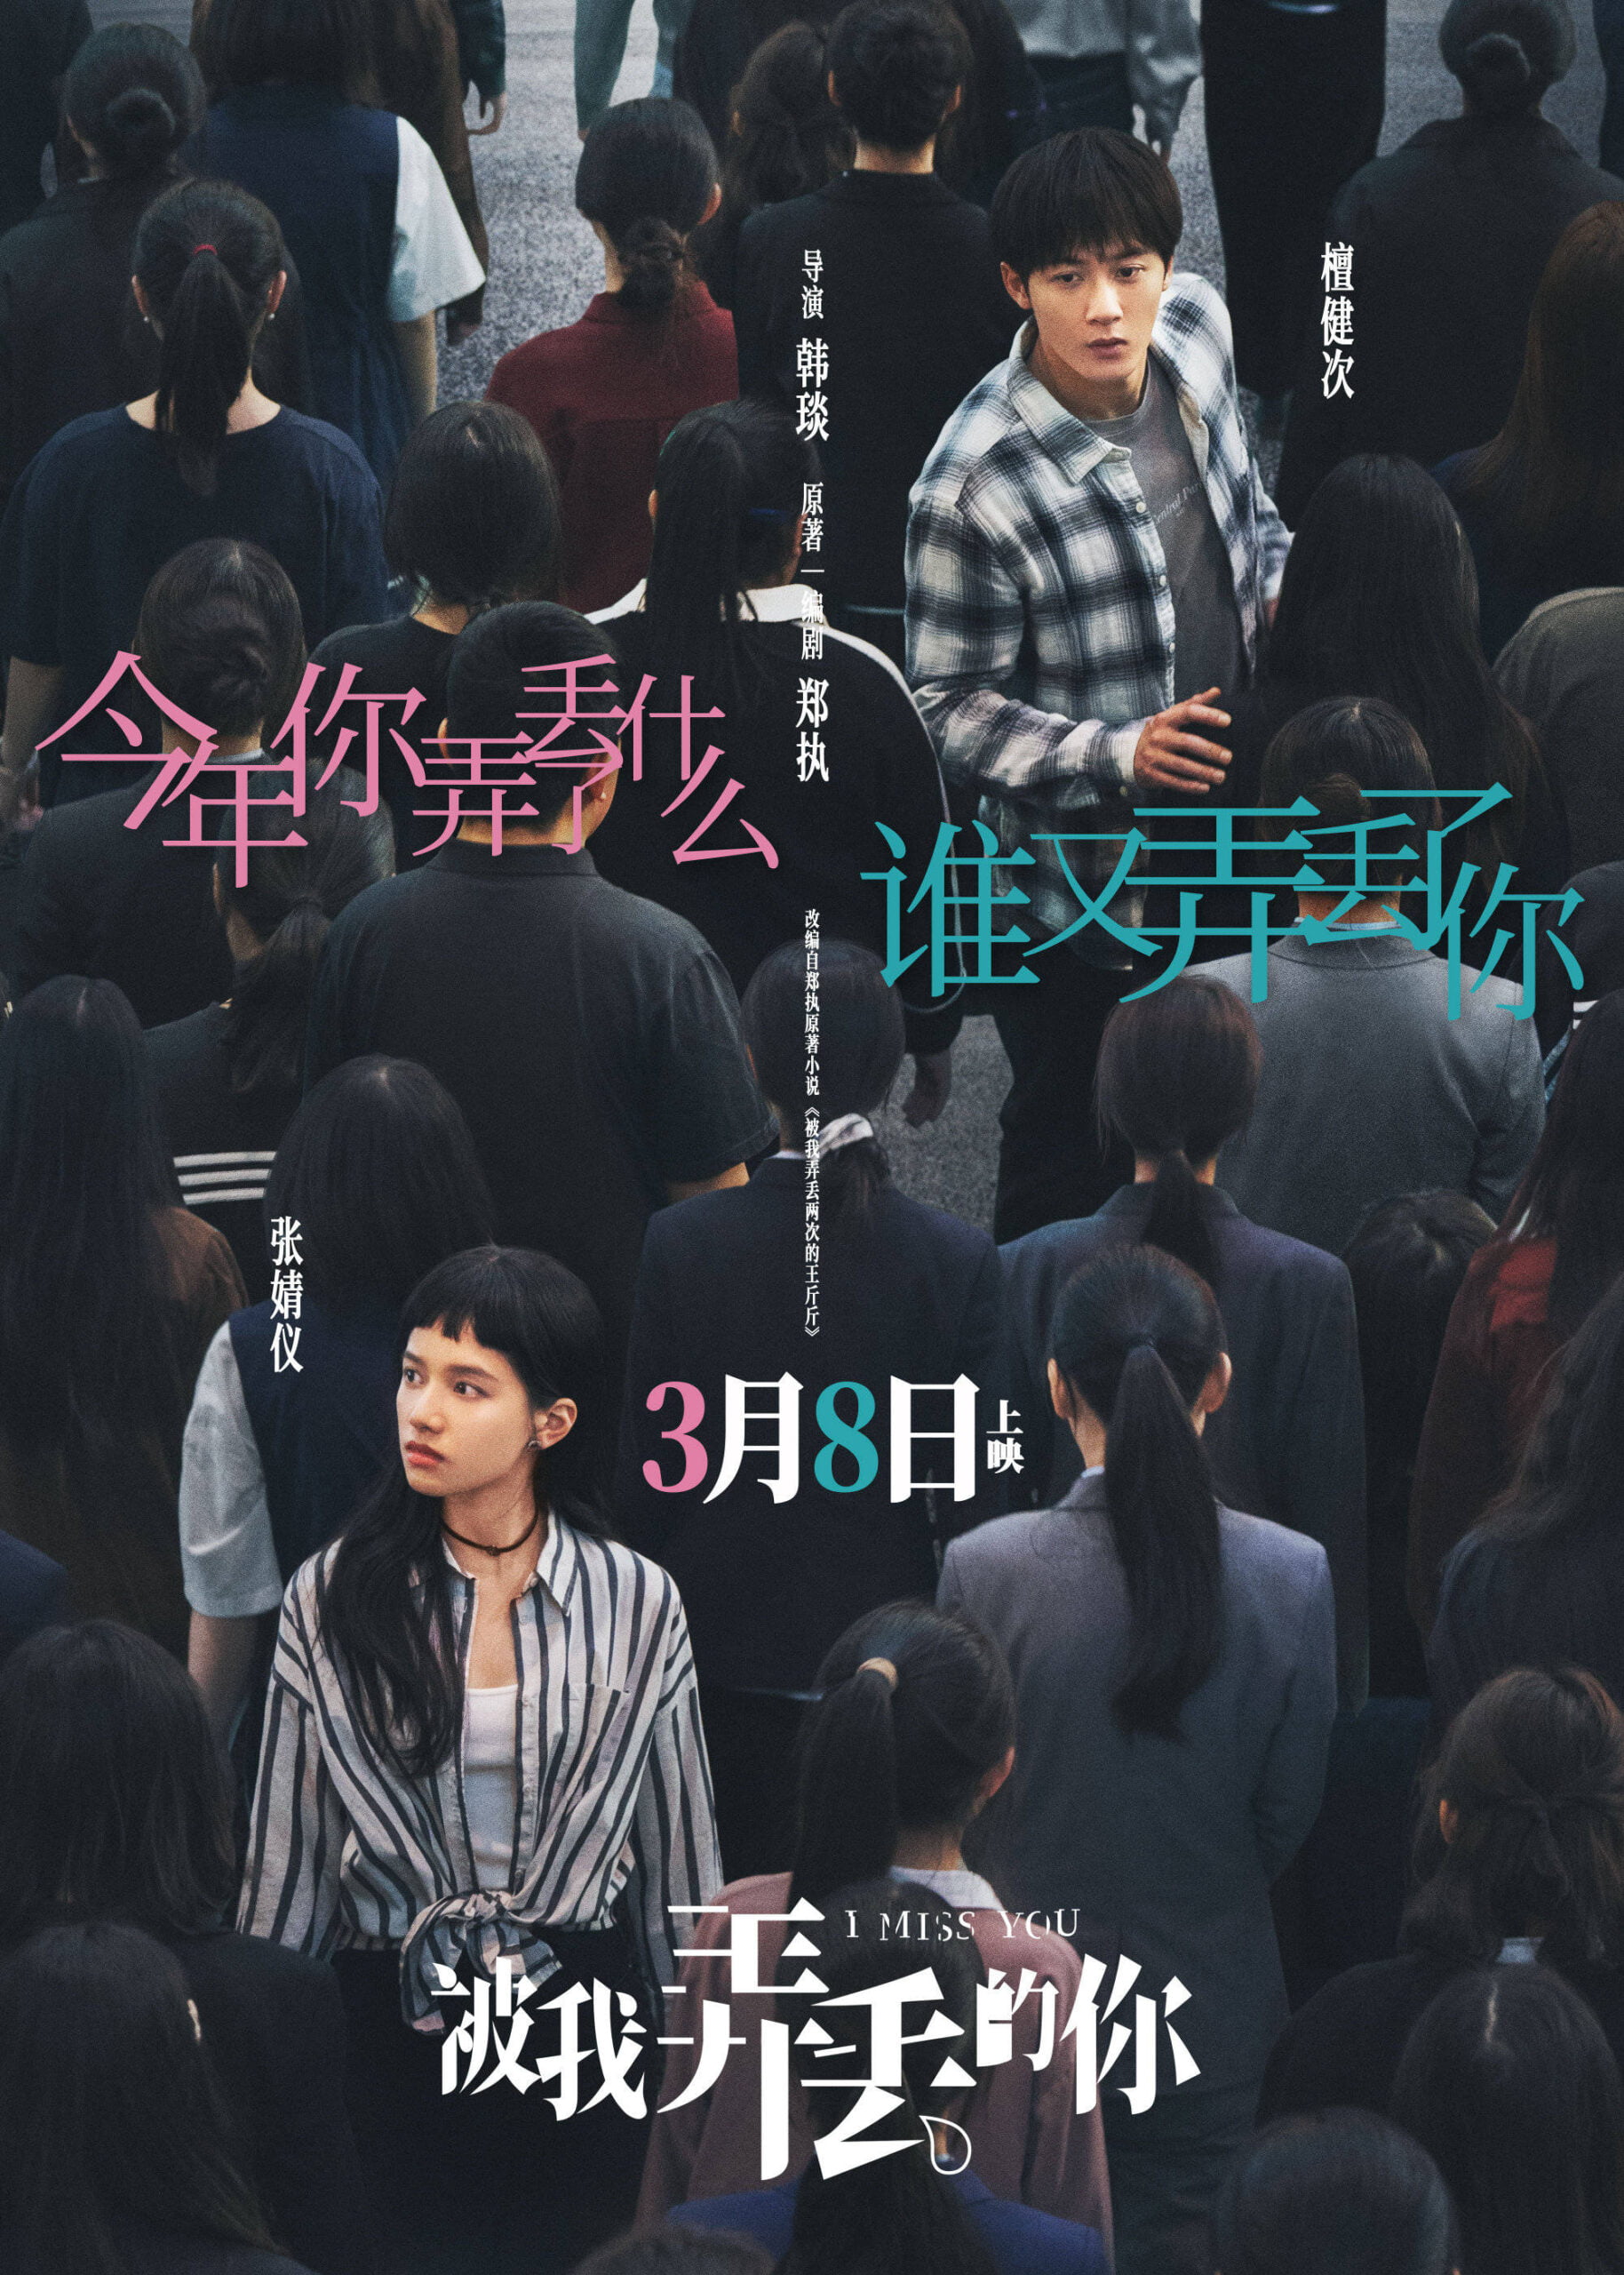 Chinese Movie I Lost You Arrives on International Womens Day scaled